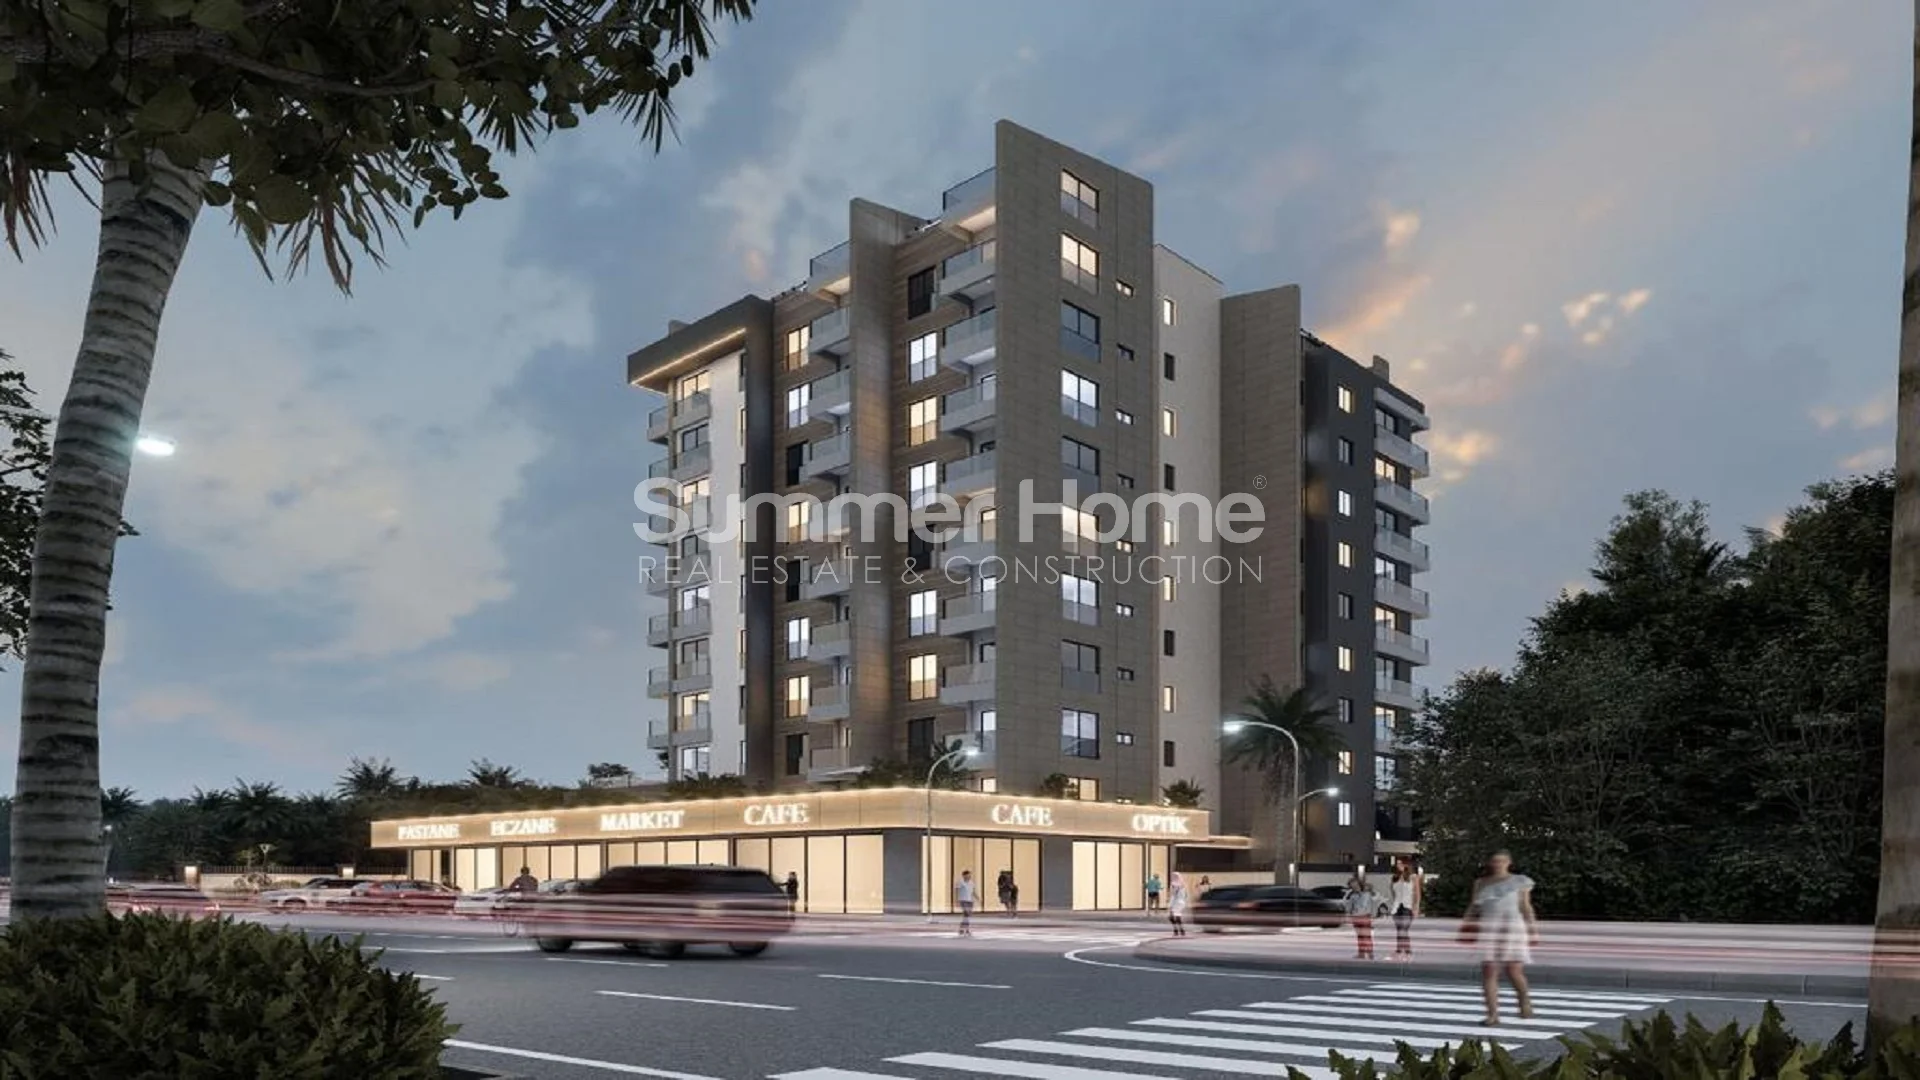 Modern, Chic Apartments For Sale Altintas general - 1